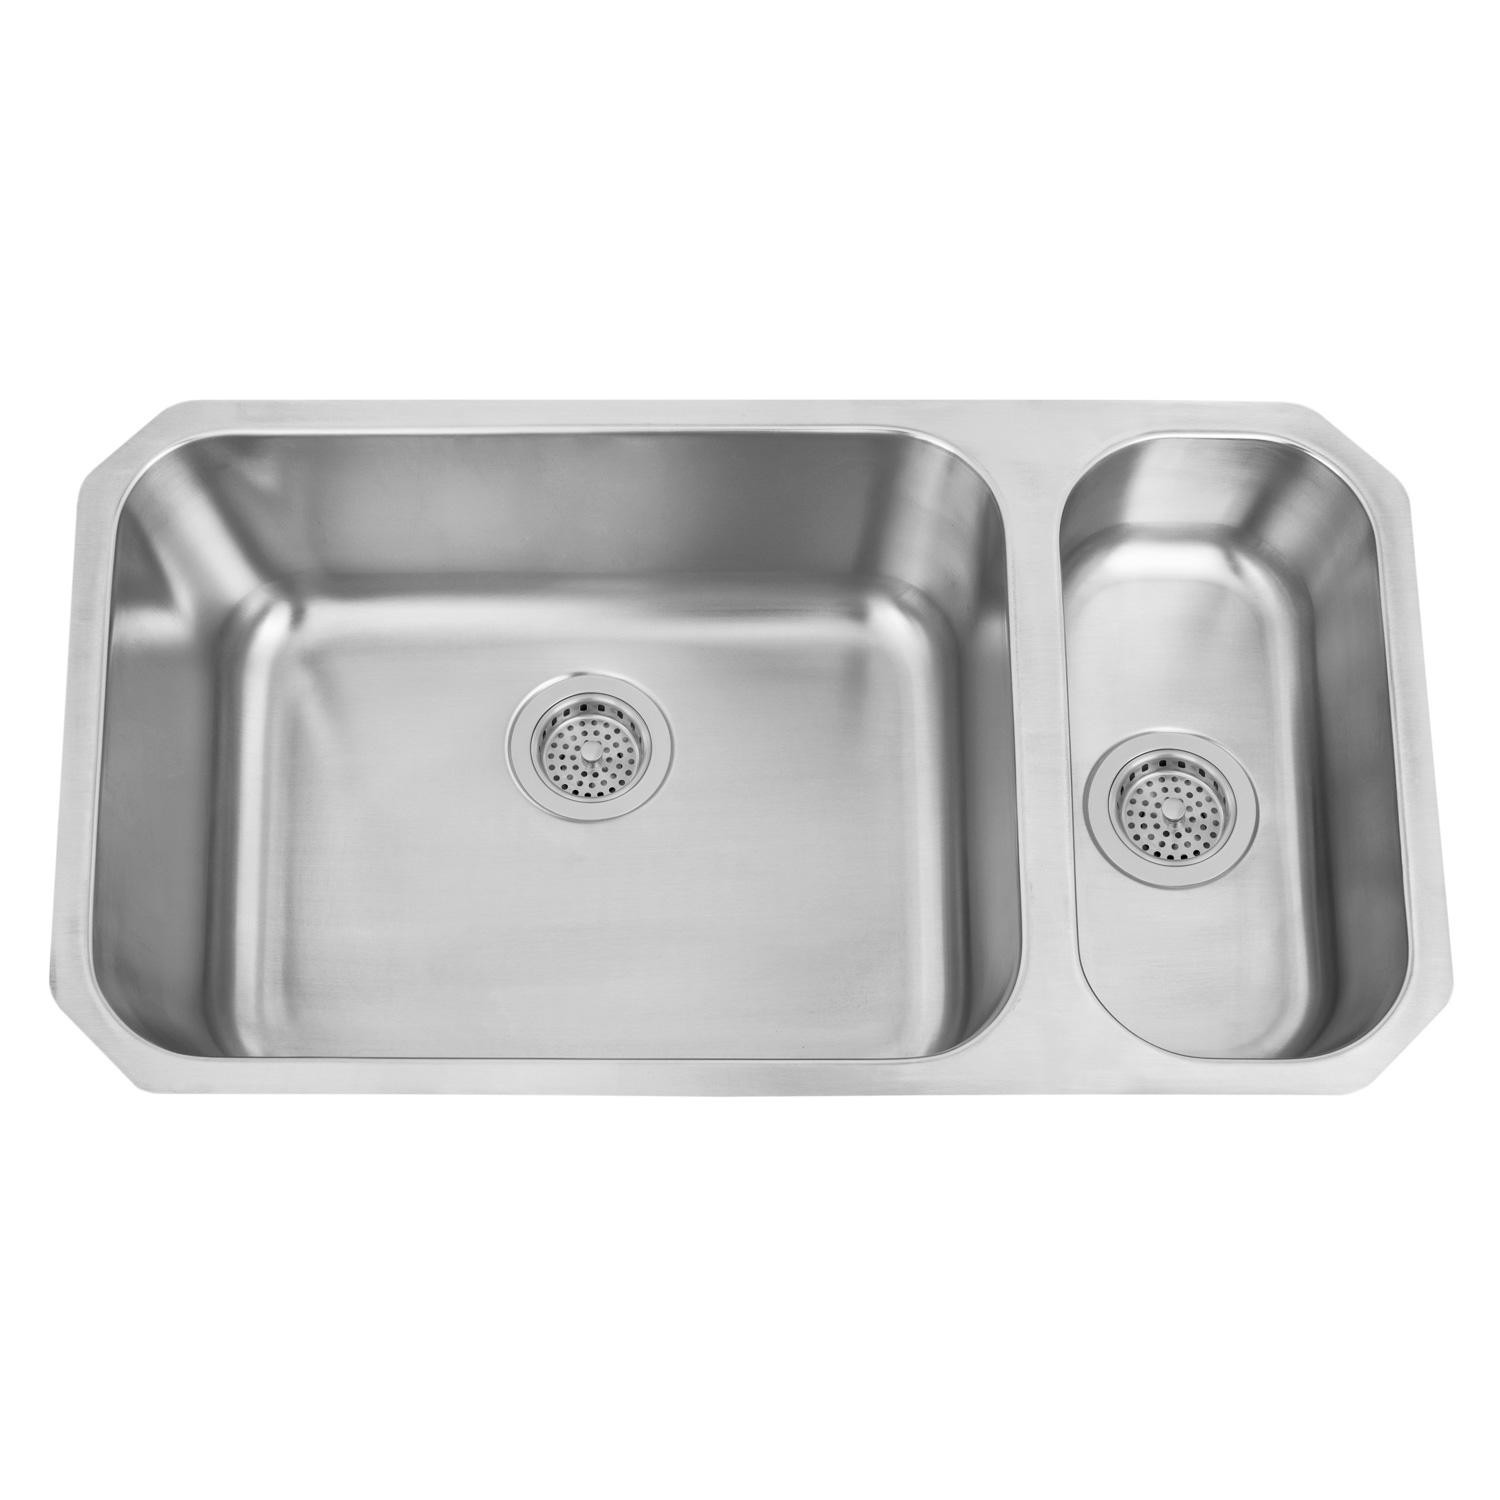 Small Double Kitchen Sink
 32" Infinite Wide 80 20 fset Double Bowl Stainless Steel